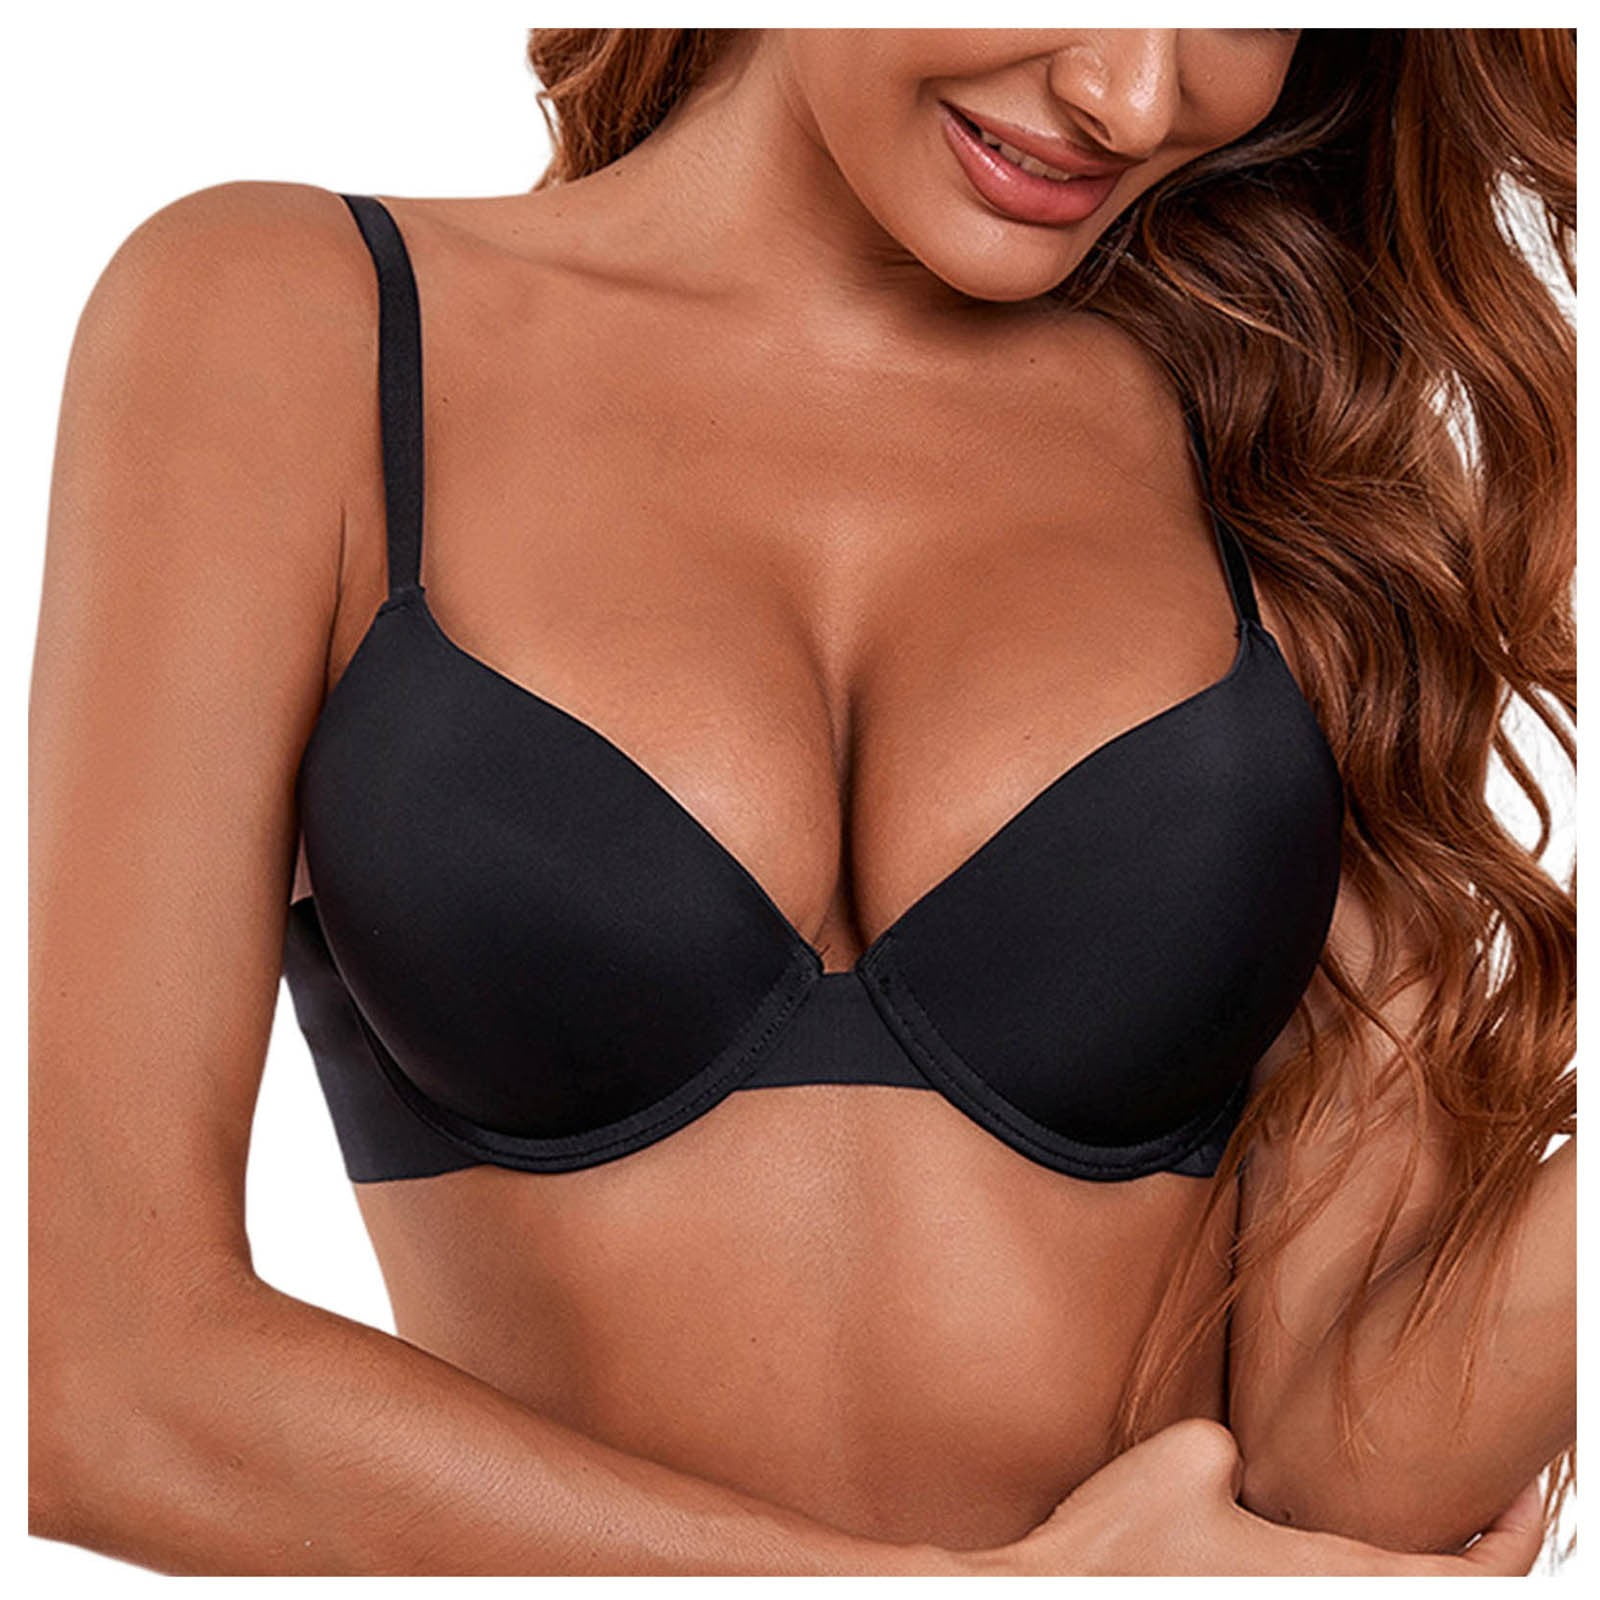 Bigersell Plus Size Push up Bras Sale Clearance Bras for Women No Underwire  Push up Bralette Bra Style C5 Back-Smoothing Bra Hook and Eye Bra Closure